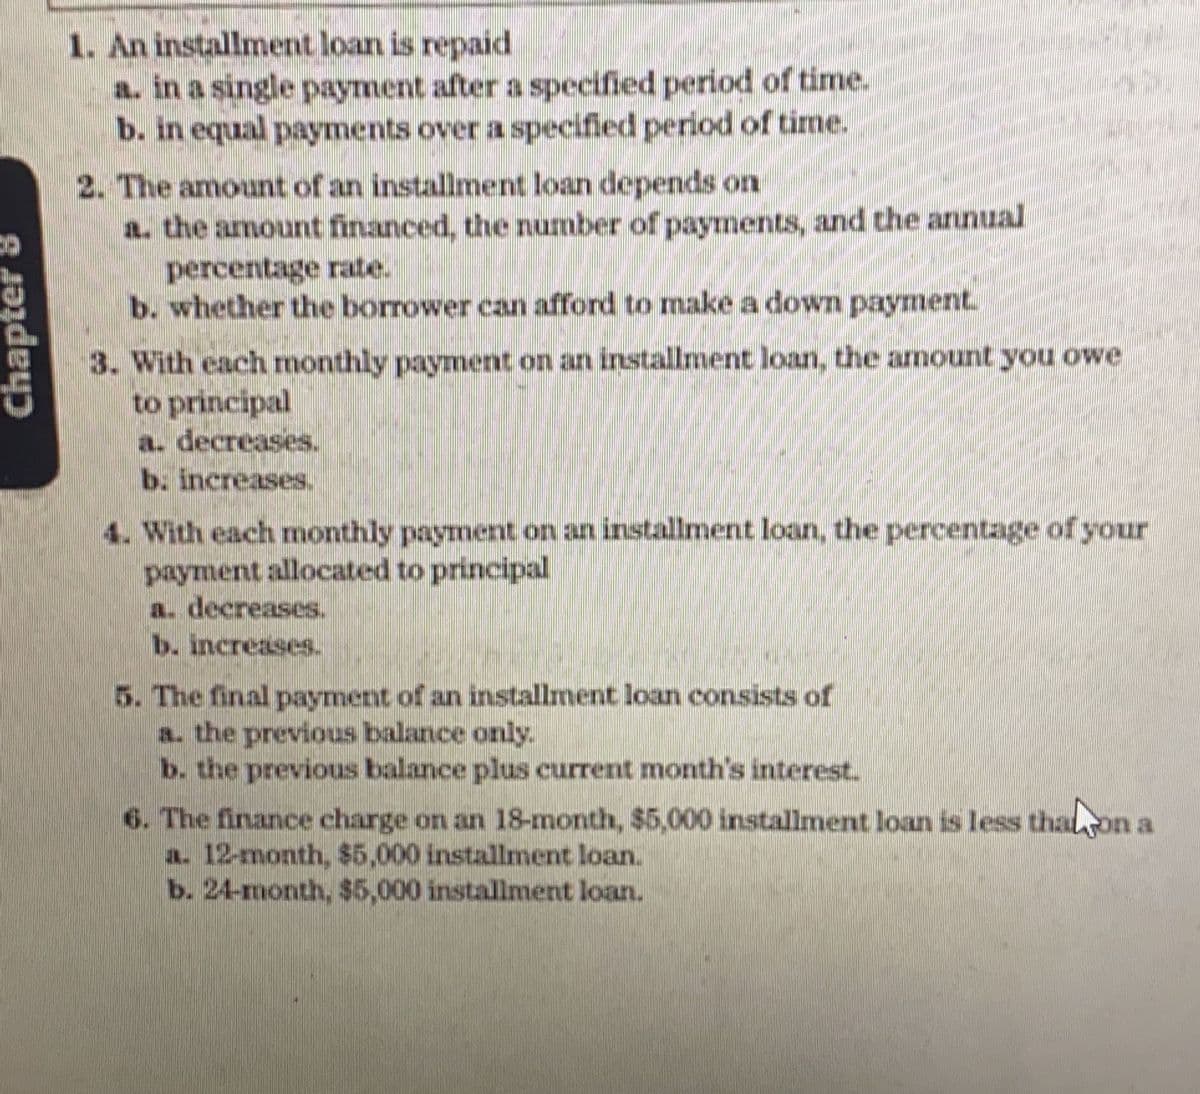 1. An installment loan is repaid
a. in a single payment after a specified period of time.
b. in equal payments over a specified period of time.
2. The amount of an installment loan depends on
a. the amount financed, the number of payments, and the annual
percentage rate.
b. whether the borrower can afford to make a down payment.
3. With each monthly payment on an installment loan, the amount you owe
to principal
a. decreases.
b. increases.
4. With each monthly payment on an installment loan, the percentage of your
payment allocated to principal
a. decreases.
b. increases.
5. The final payment of an installment loan consists of
a. the previous balance only.
b. the previous balance plus current month's interest.
6. The finance charge on an 18-month, $5,000 installment loan is less thalon a
a. 12-month, $5,000 installment loan.
b. 24-month, $5,000 installment loan.
Chap
